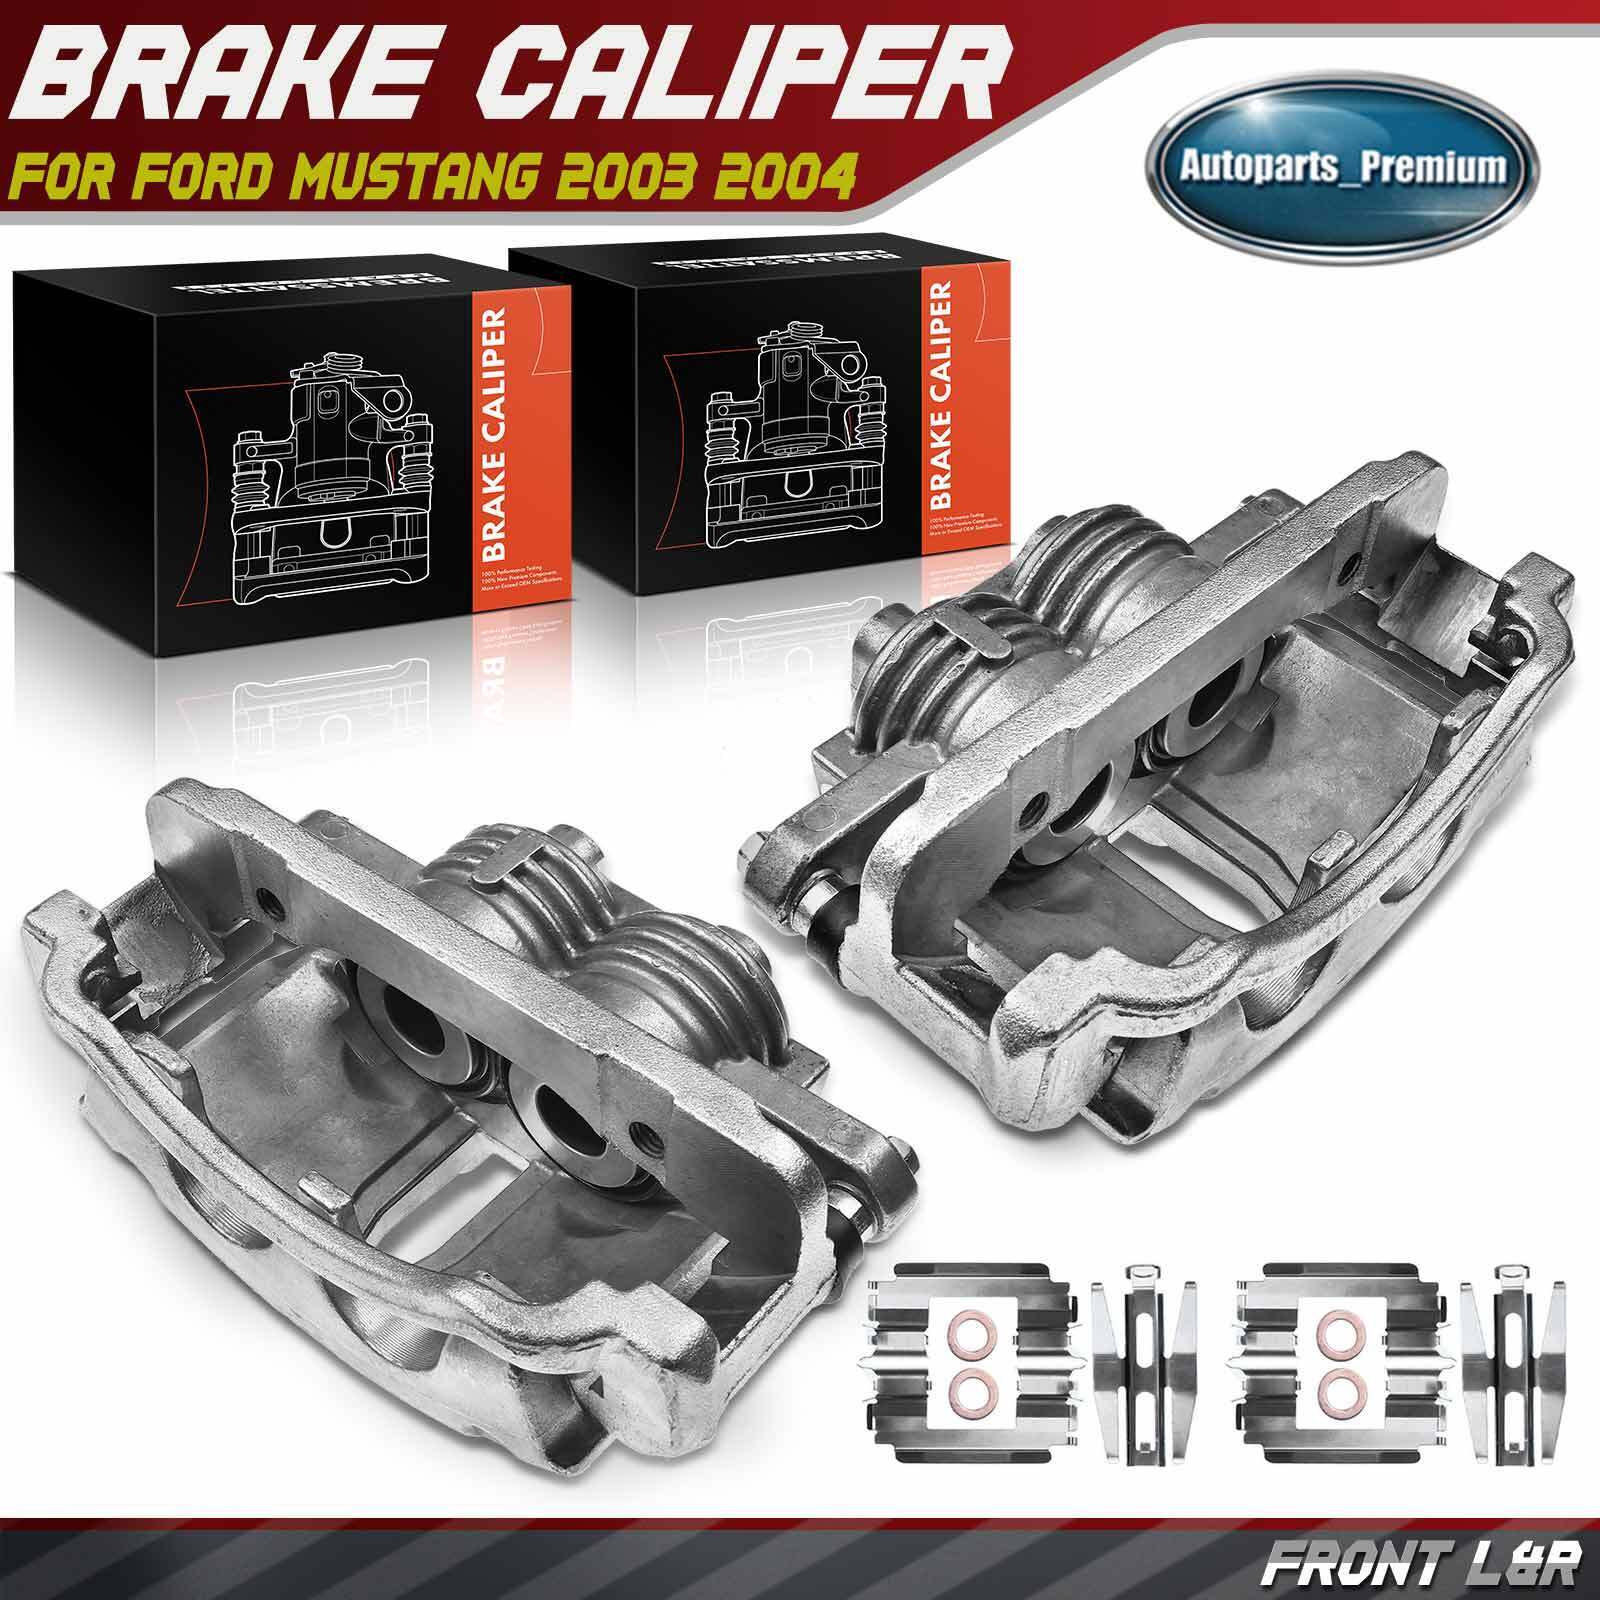 2x Disc Brake Calipers w/ Bracket for Ford Mustang 2003 2004 Front Left & Right